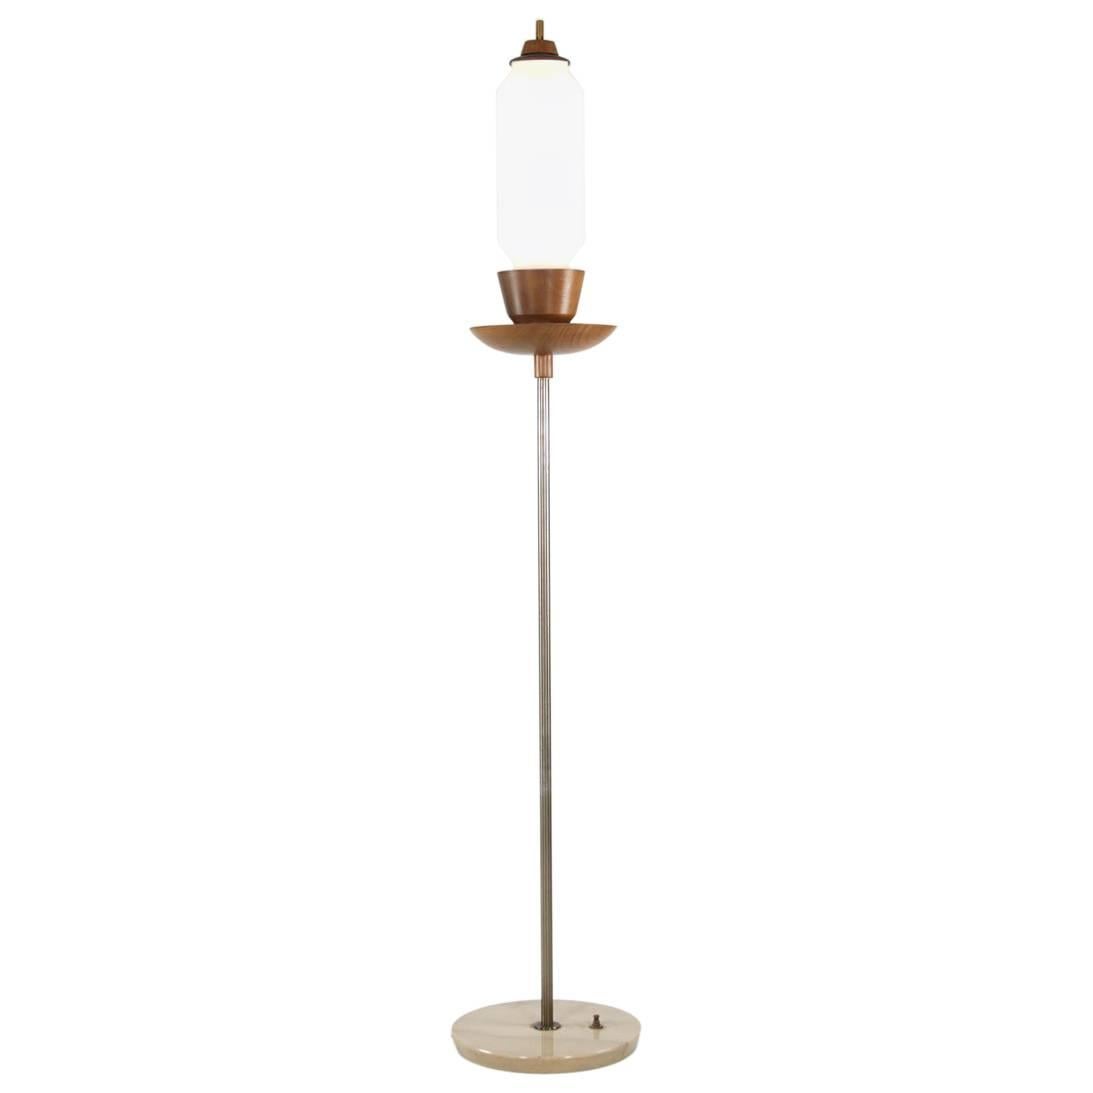 Vintage Italian Marble, Oak and Brass Floor Lamp, 1960s For Sale